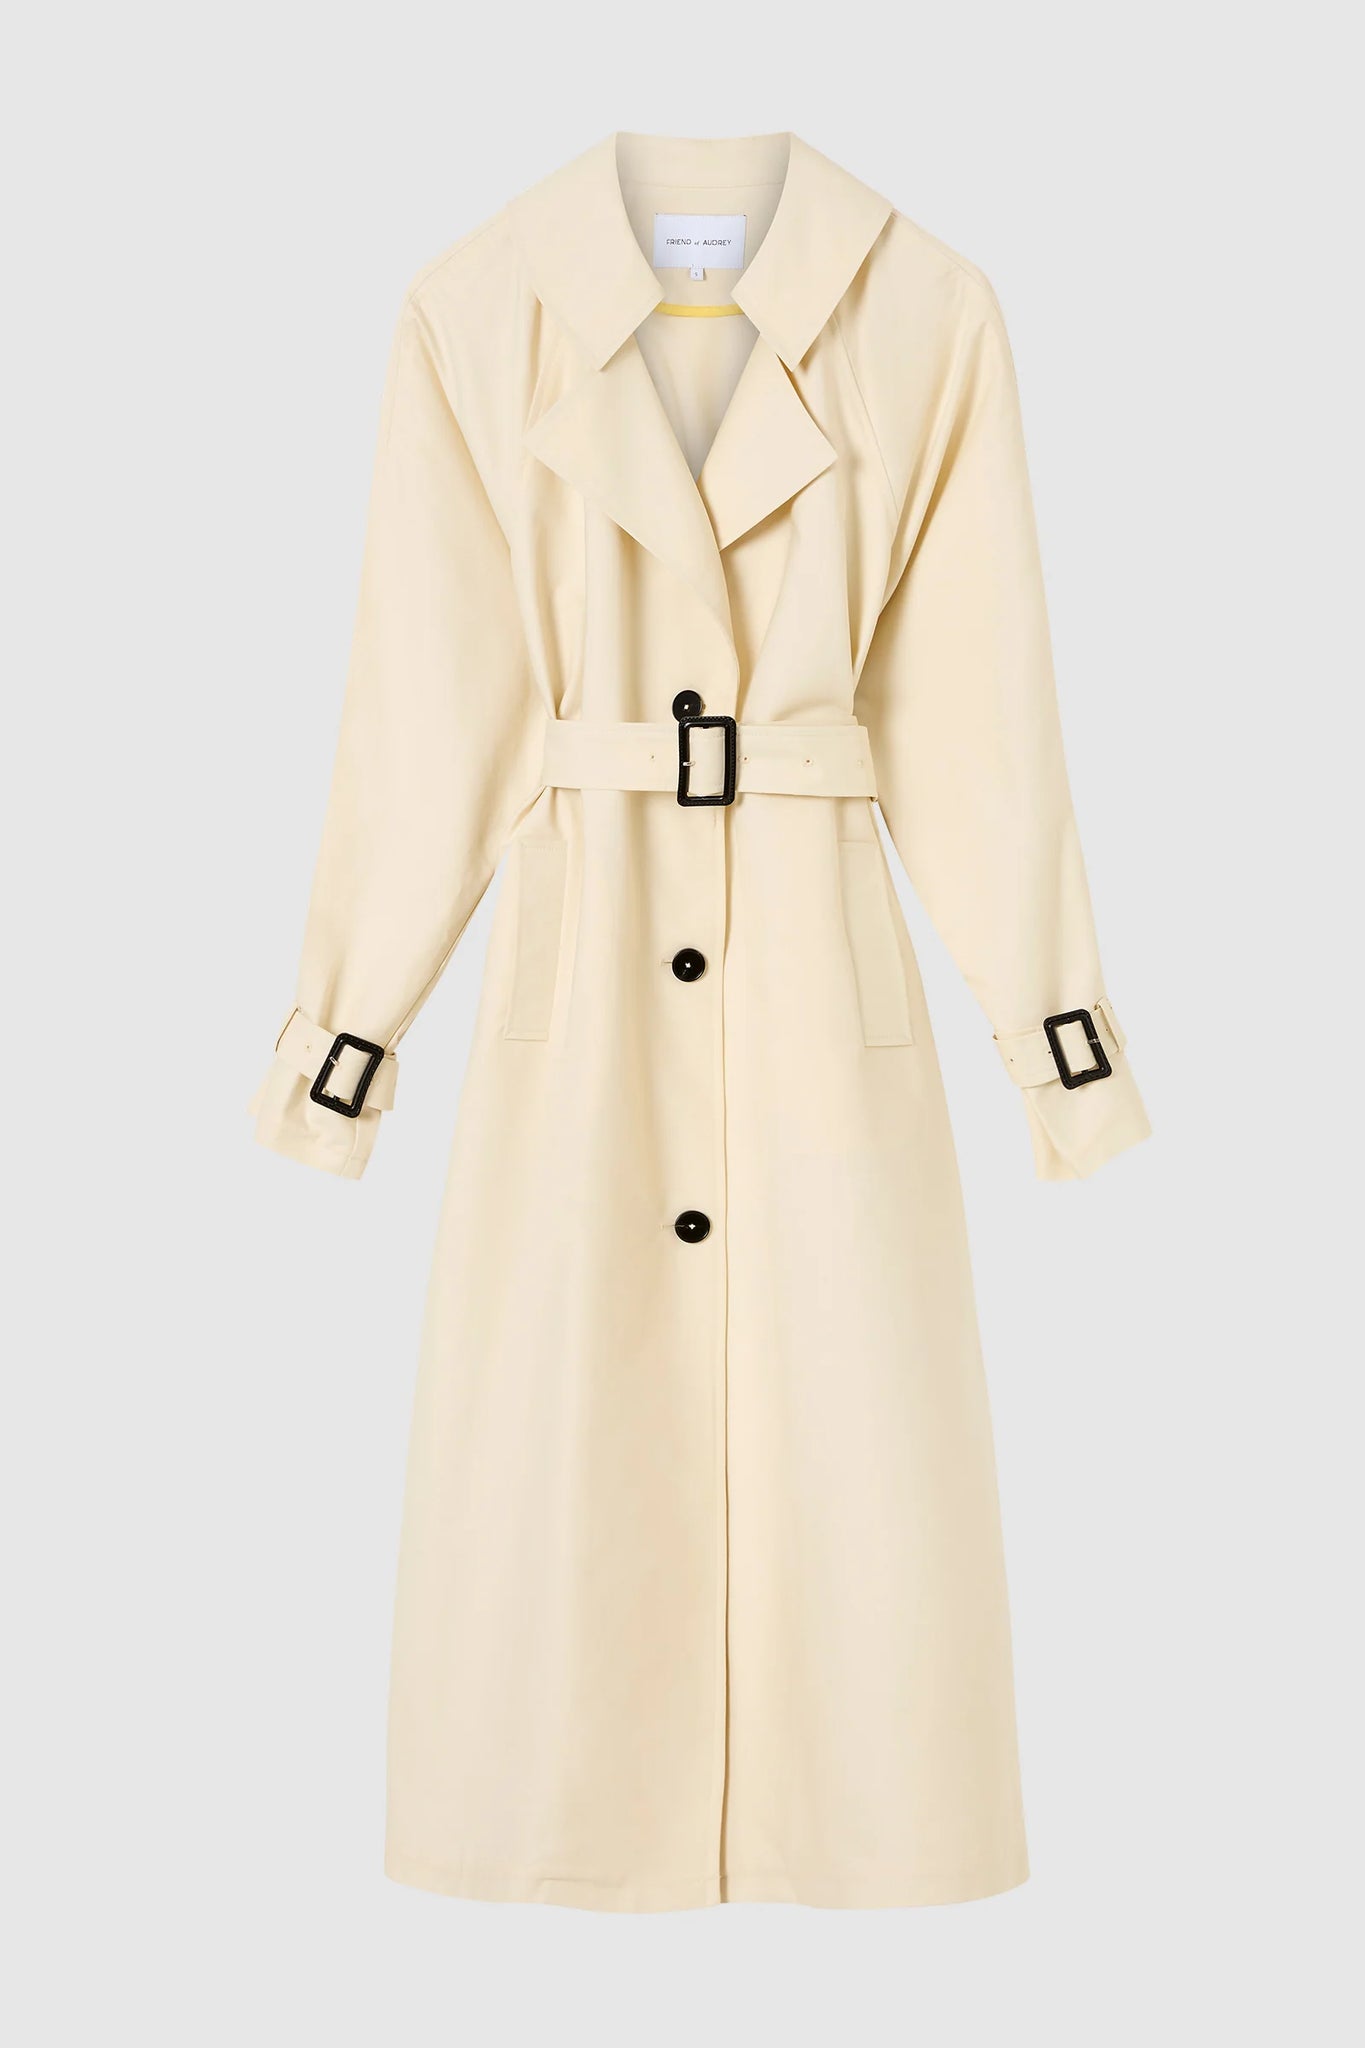 Friend of Audrey Browne Oversized Trench Coat - Bone